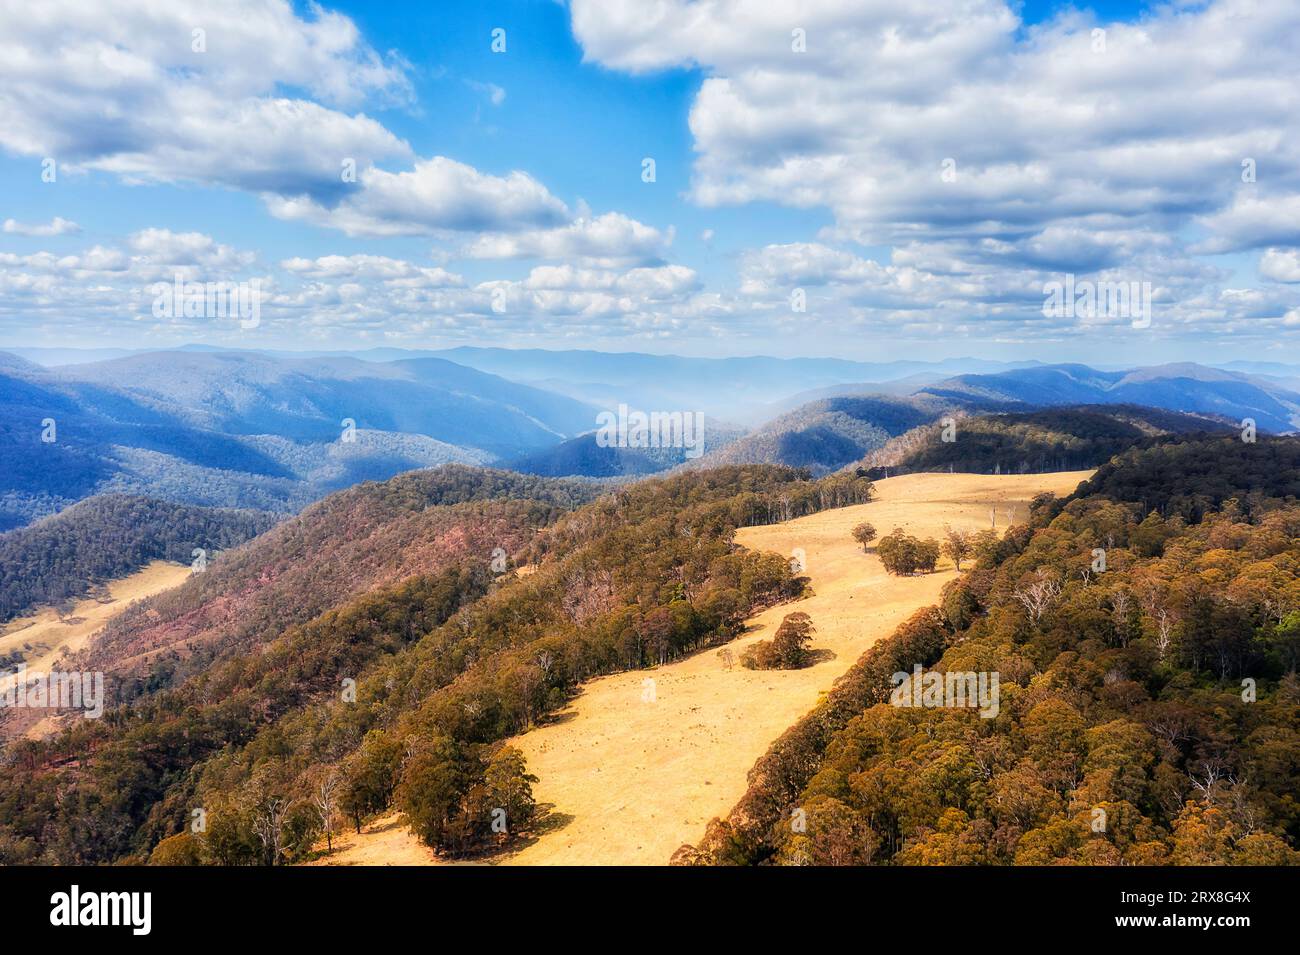 Scenic mountain countryside in highlands of NSW Australian plateau - Pioneer lookout. Stock Photo